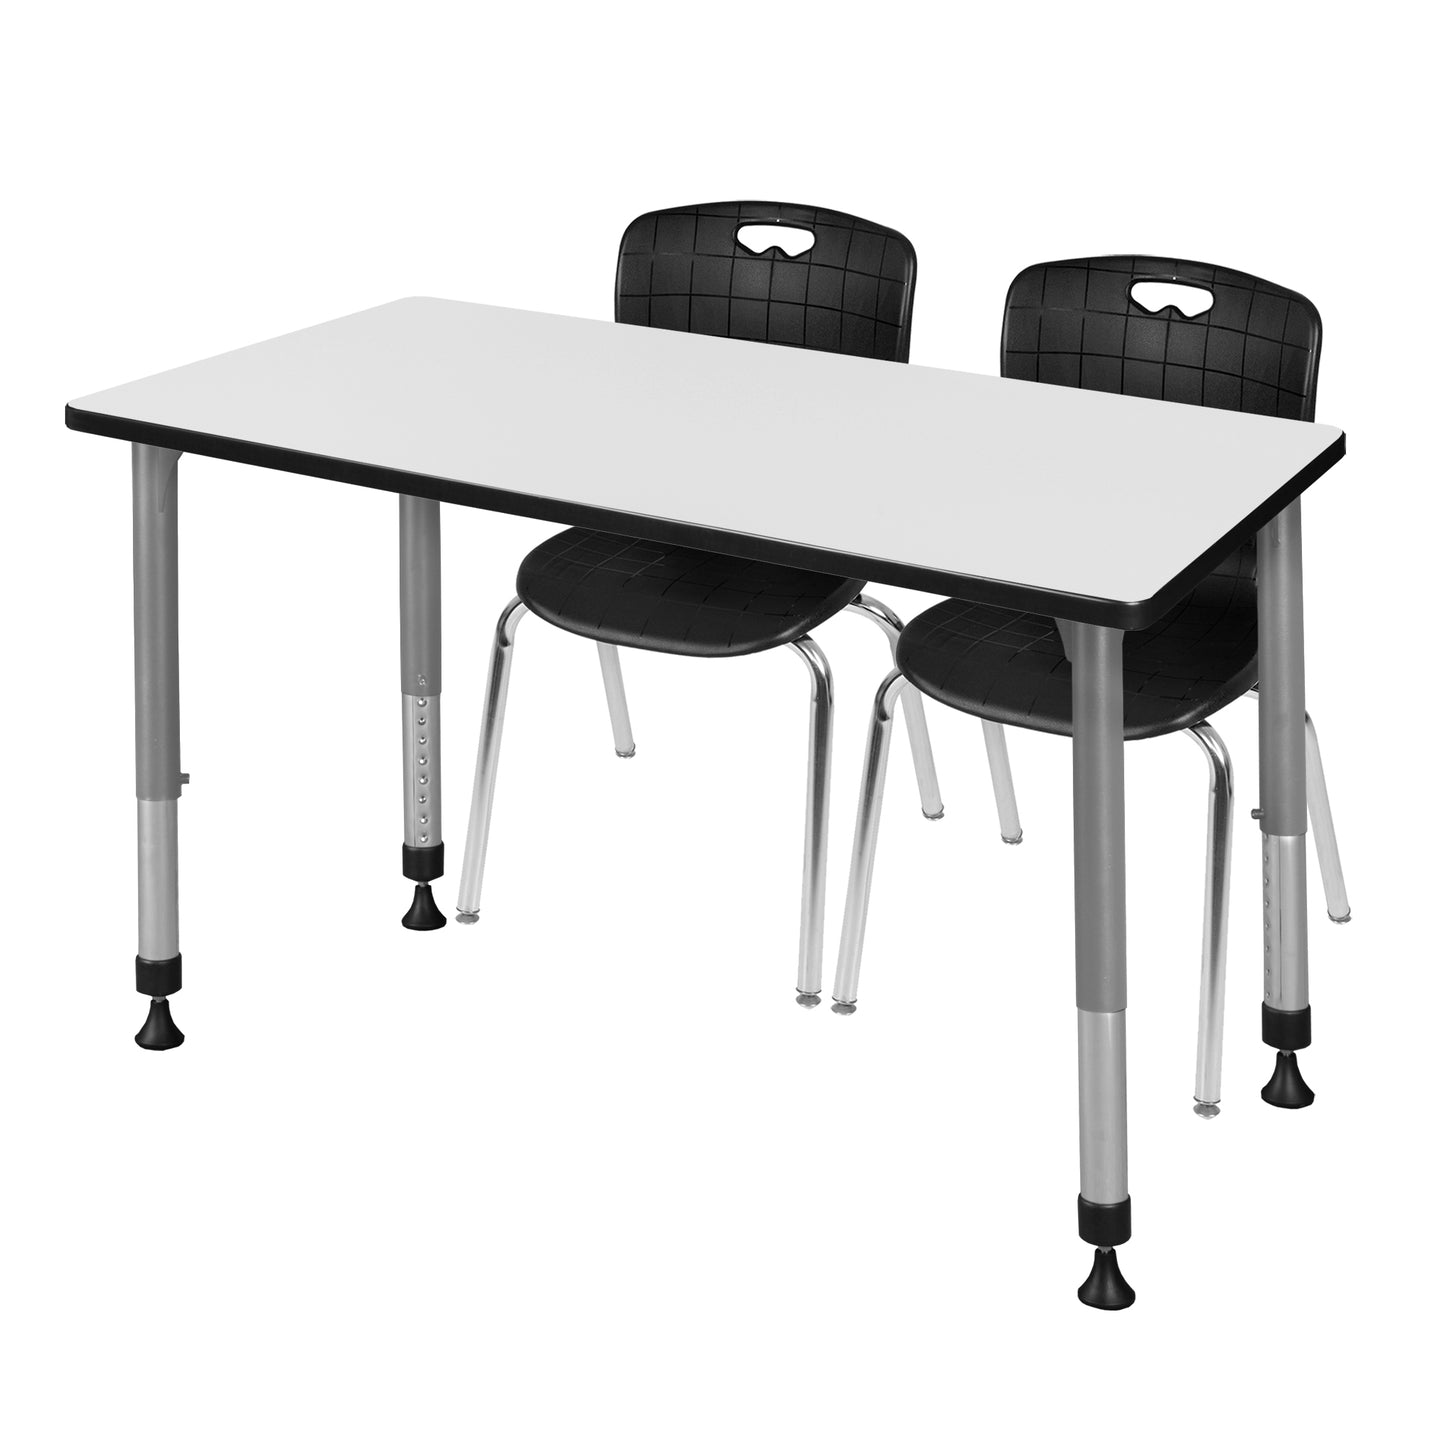 Regency Kee 48 x 24 in. Adjustable Classroom Table & 2 Andy 18 in. Stack Chairs